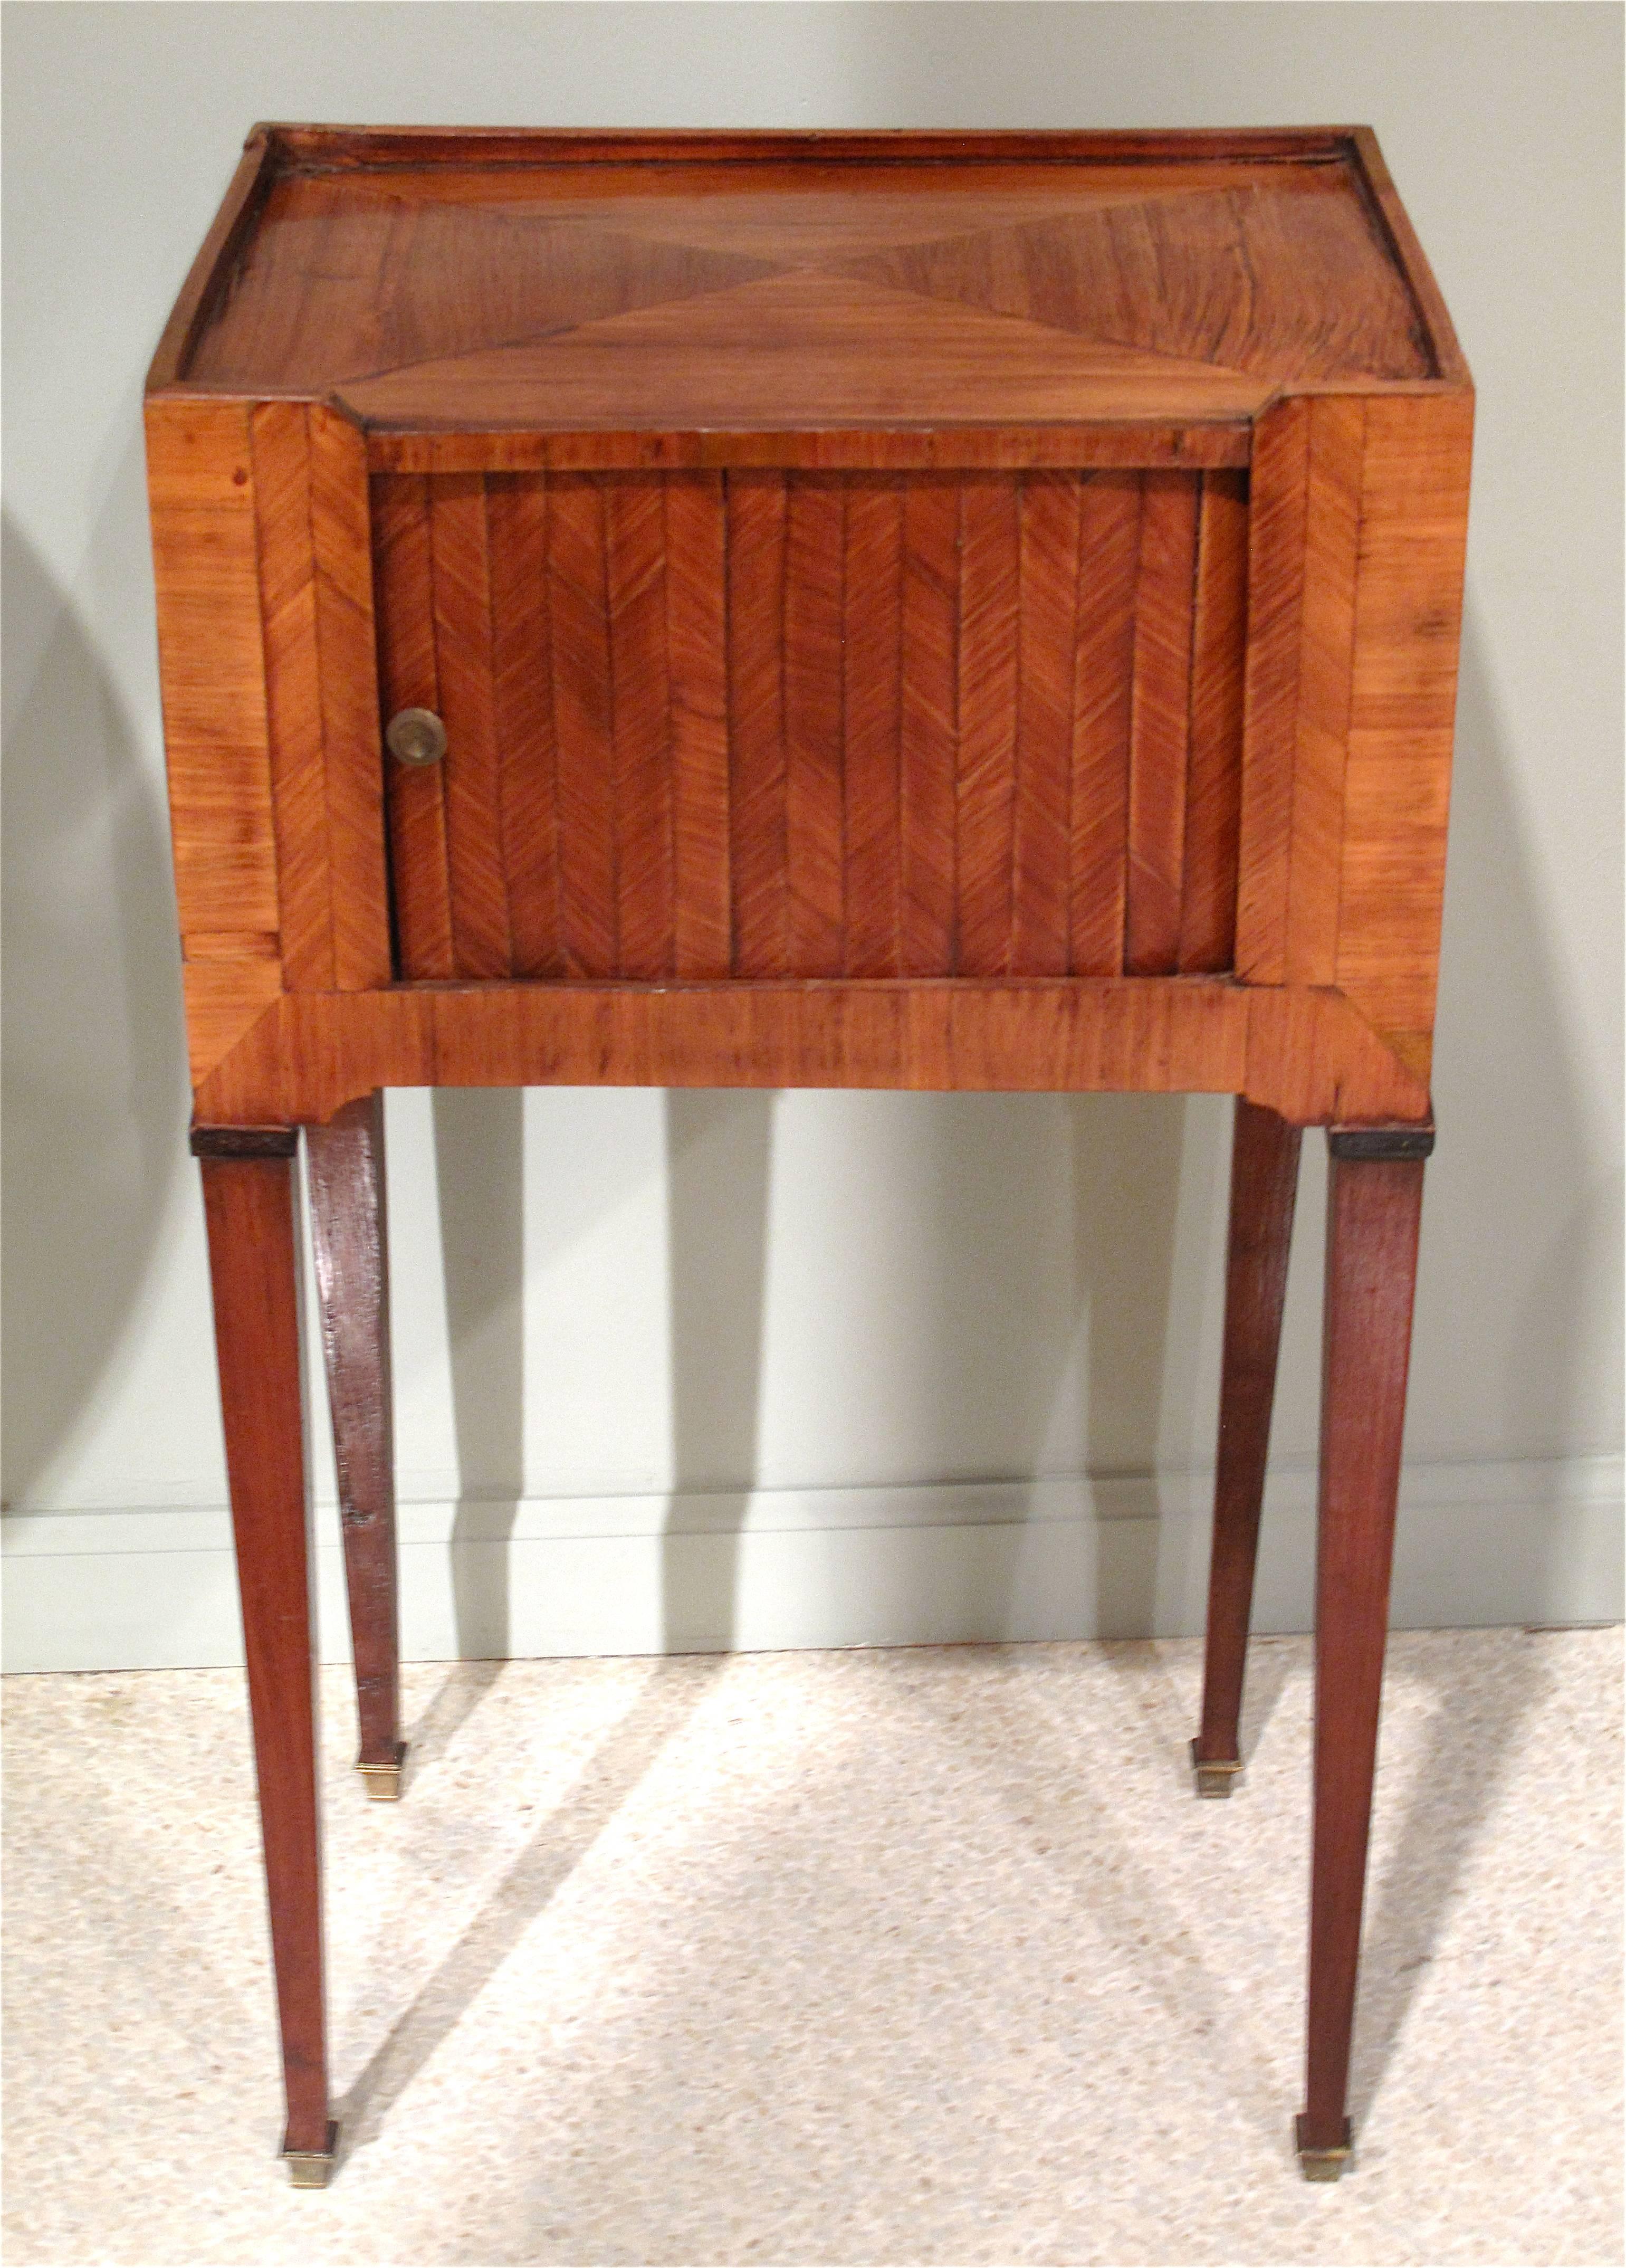 A fine tambour fronted tulipwood marquetry table, ca 1780, originally used as a bedside table. The tambour is in excellent working condition. The marquetry is finished and very attractive on all four sides.